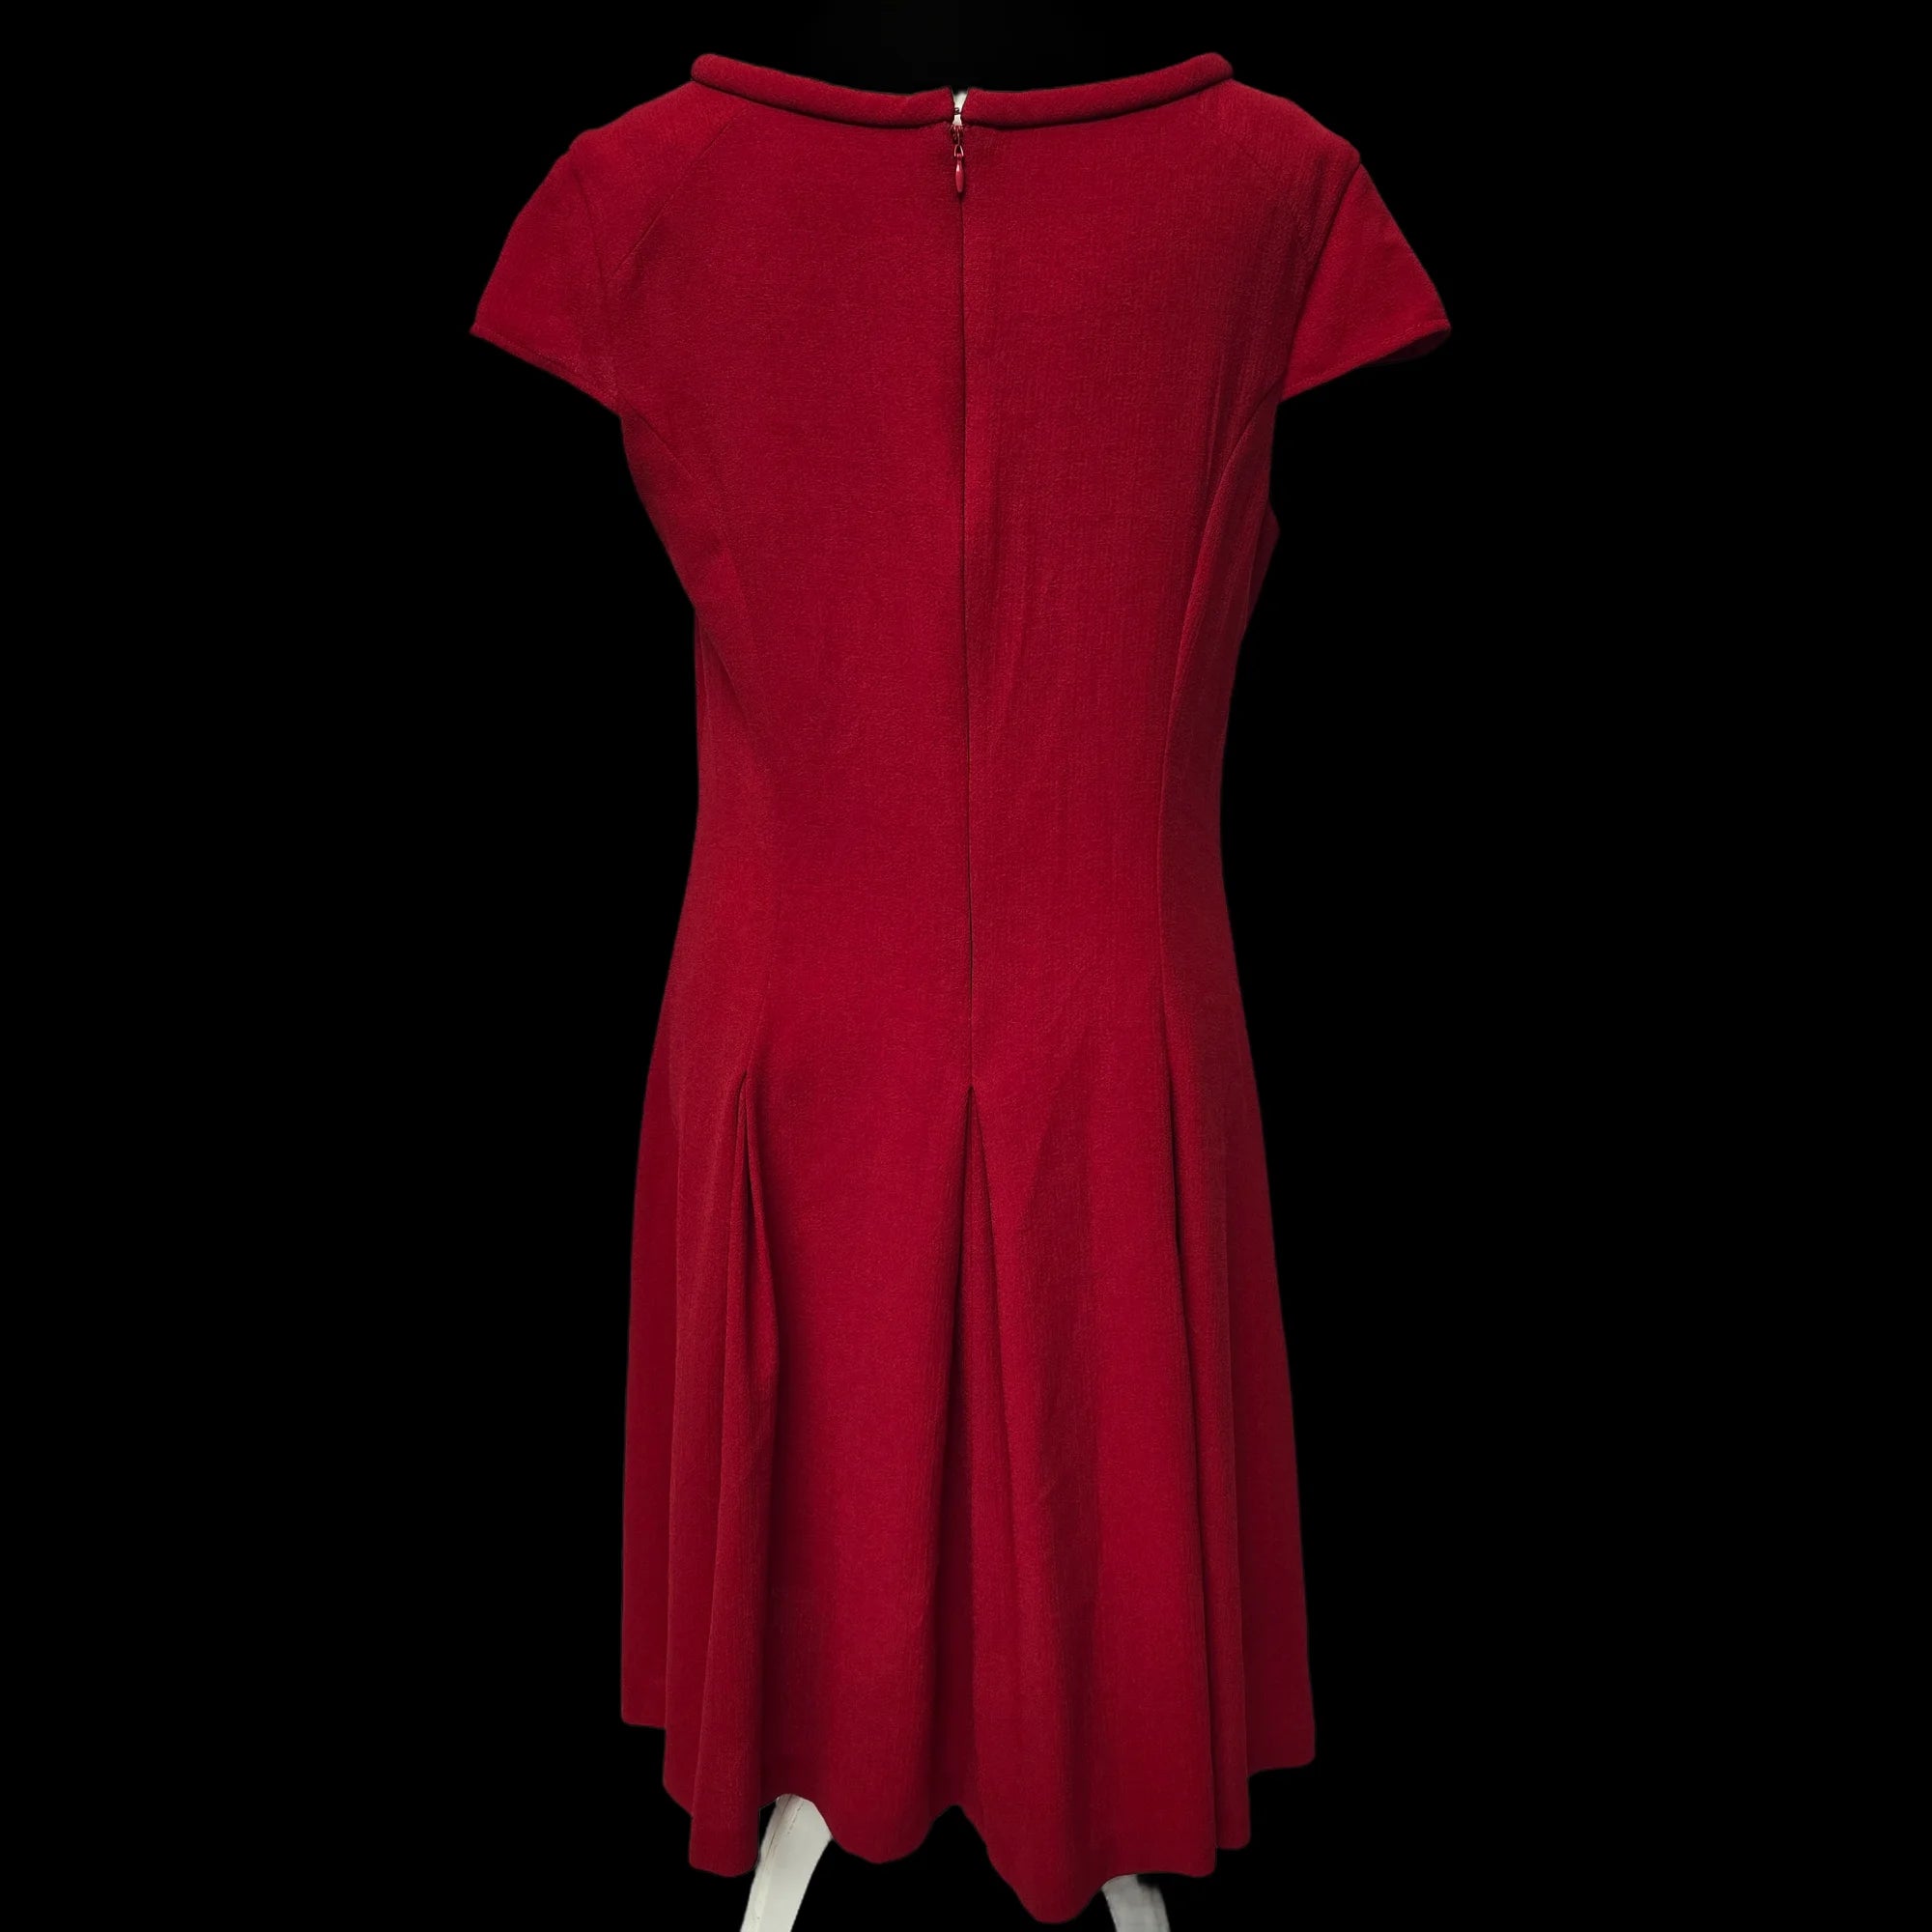 Womens Next Red Fit And Flare Dress UK 14 - Dresses - 2